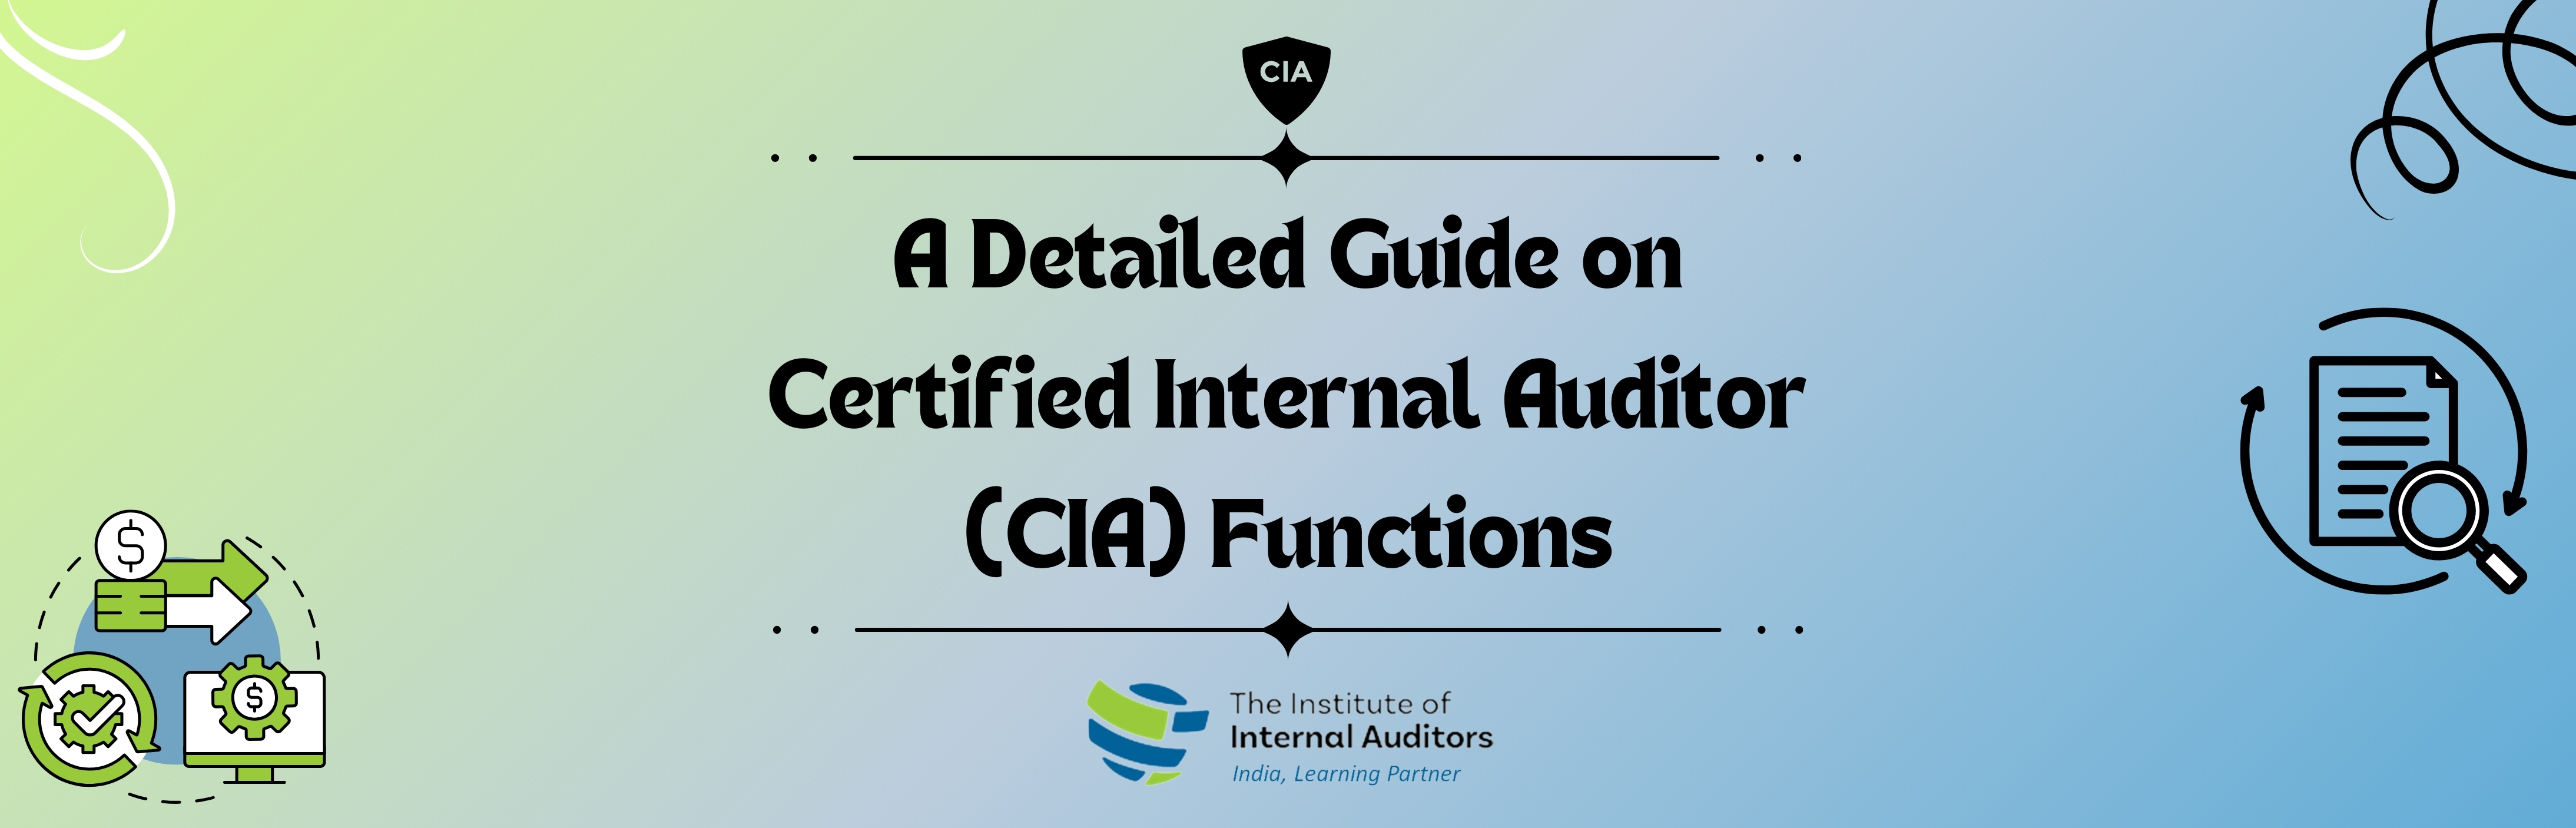 A Detailed Guide on Certified Internal Auditor Functions